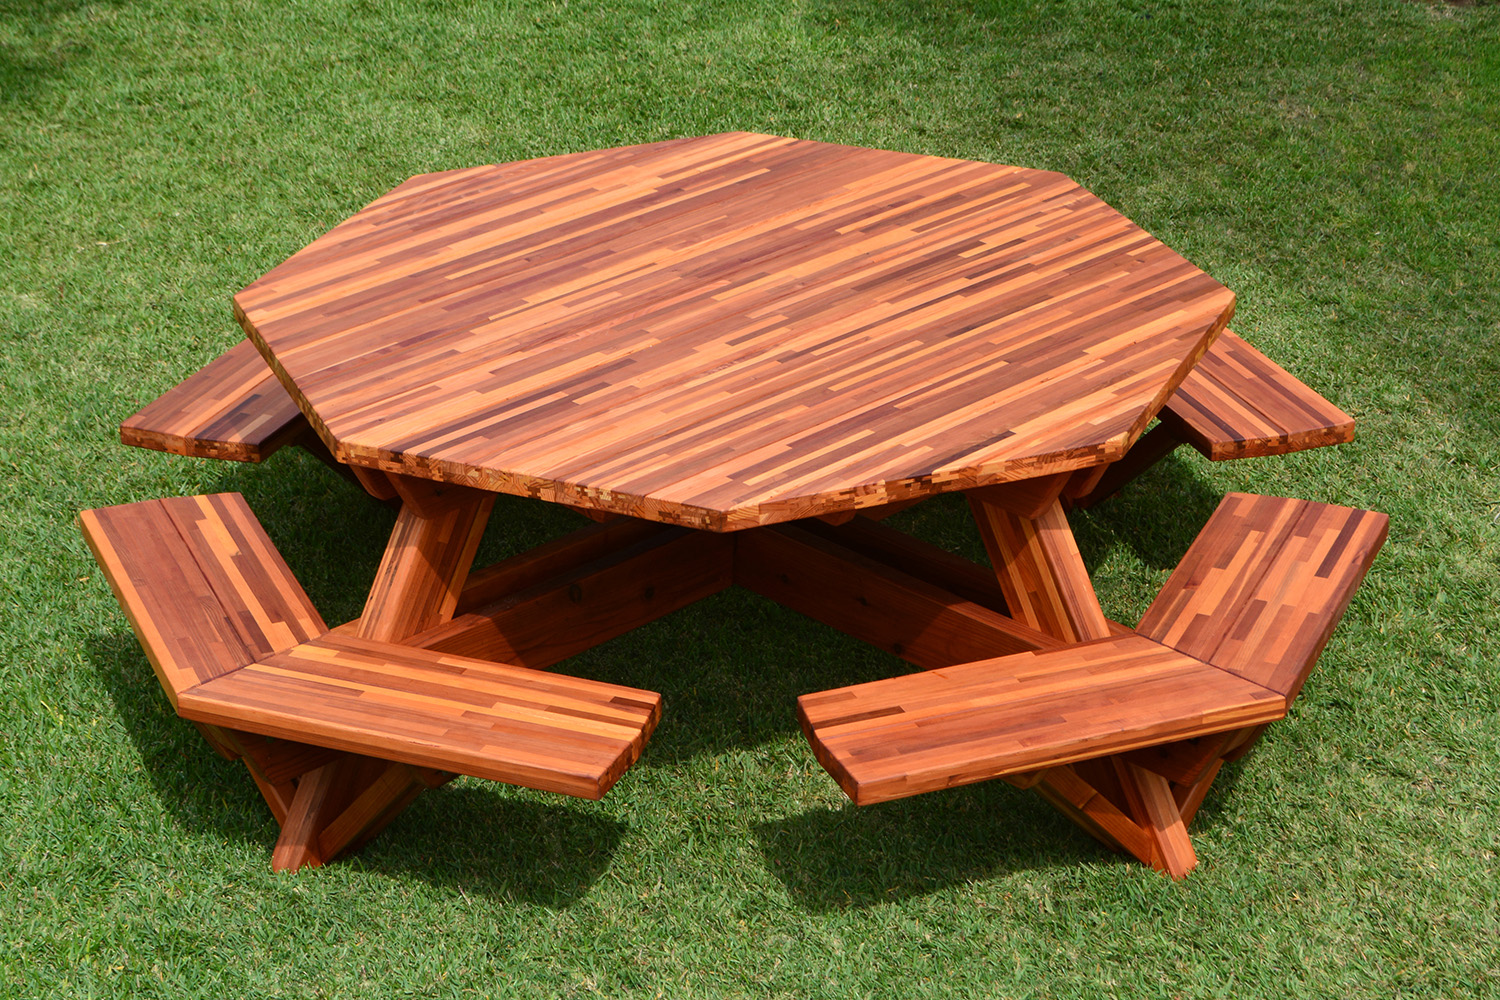 Wooden octagon picnic table